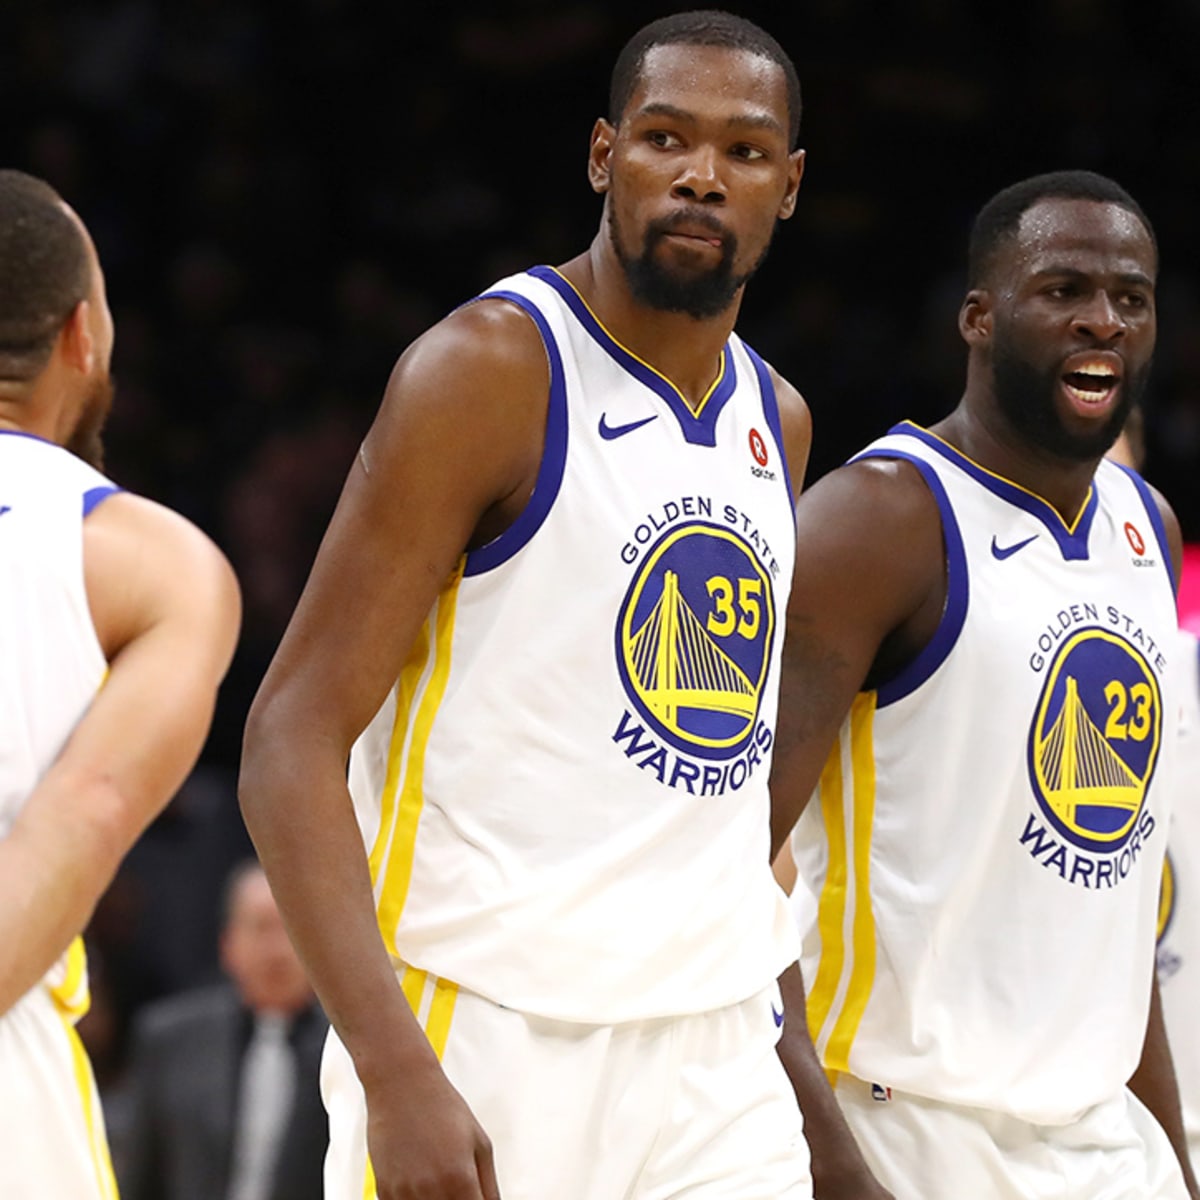 New-look Warriors have smooth first day with Kevin Durant - Washington Times